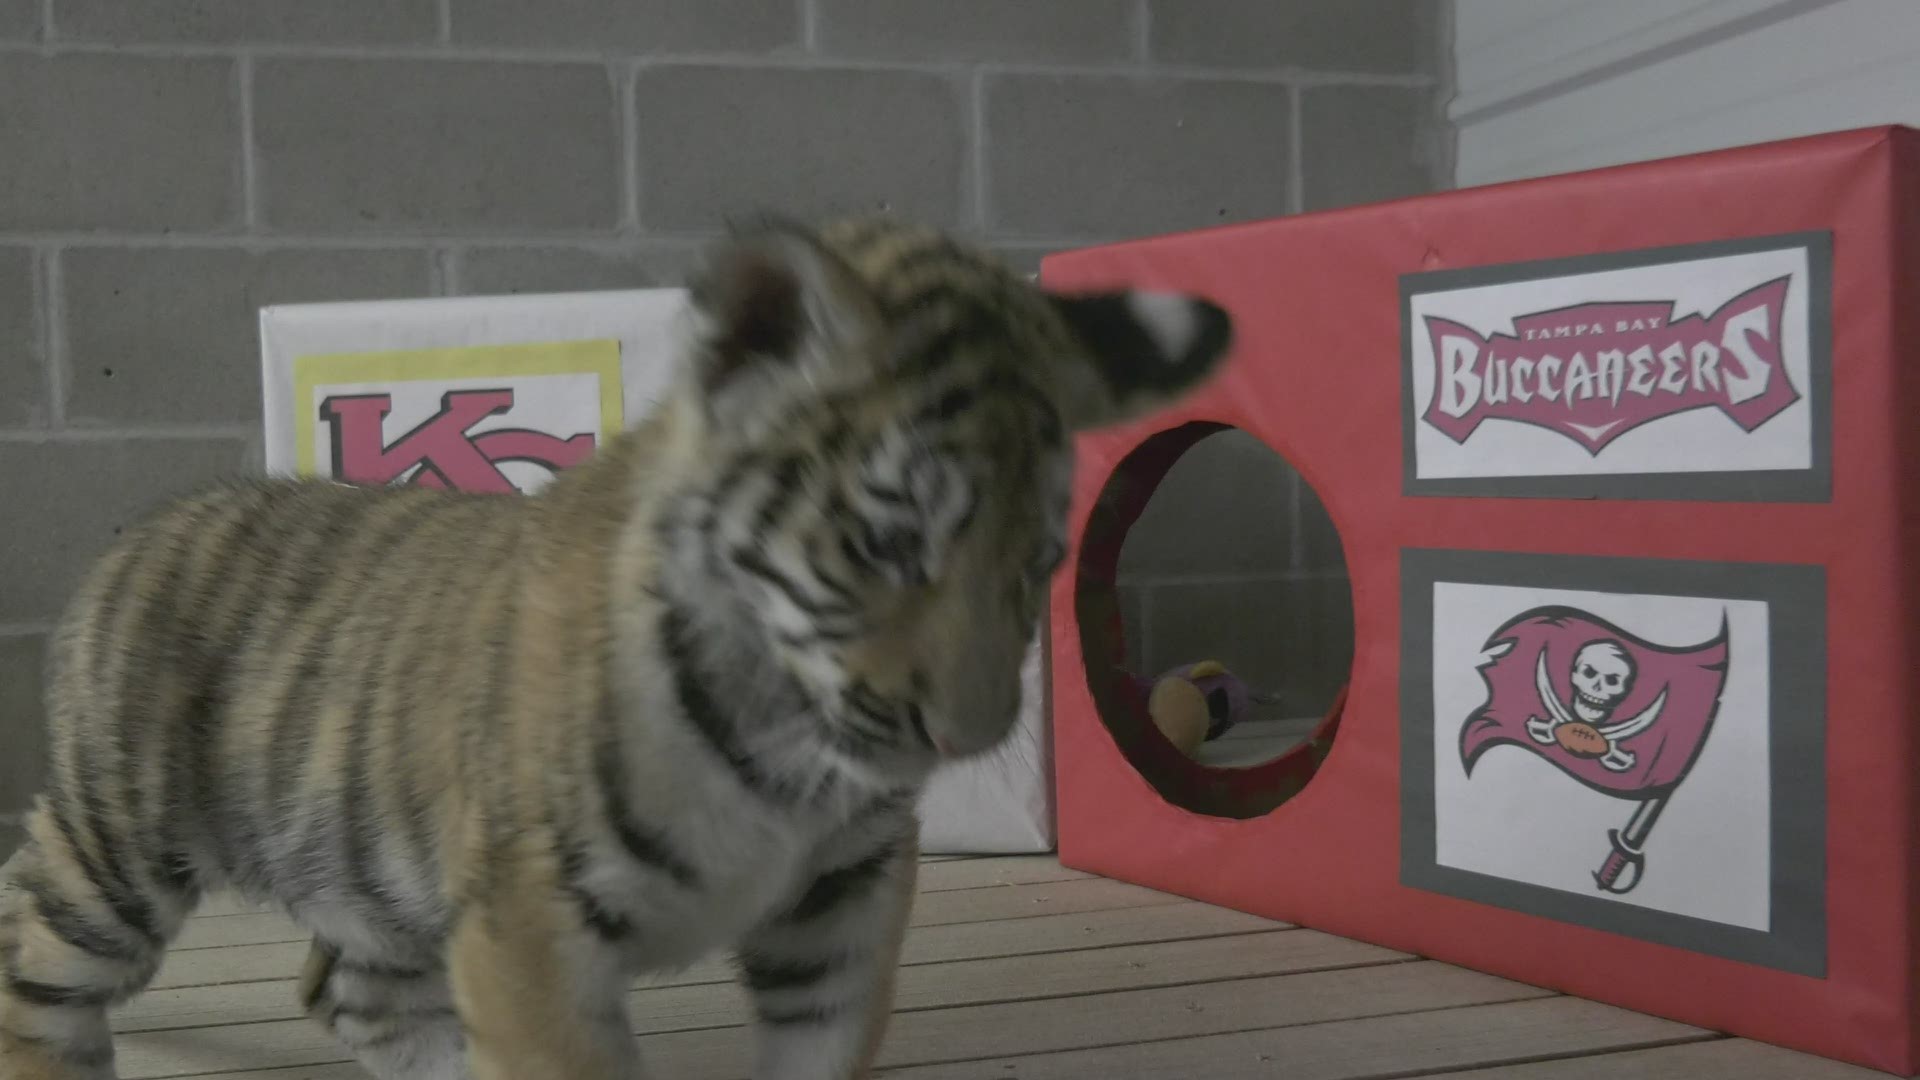 A 10-week-old tiger cub at The Wildcat Sanctuary near Sandstone has made his pick for who will win Super Bowl LV.